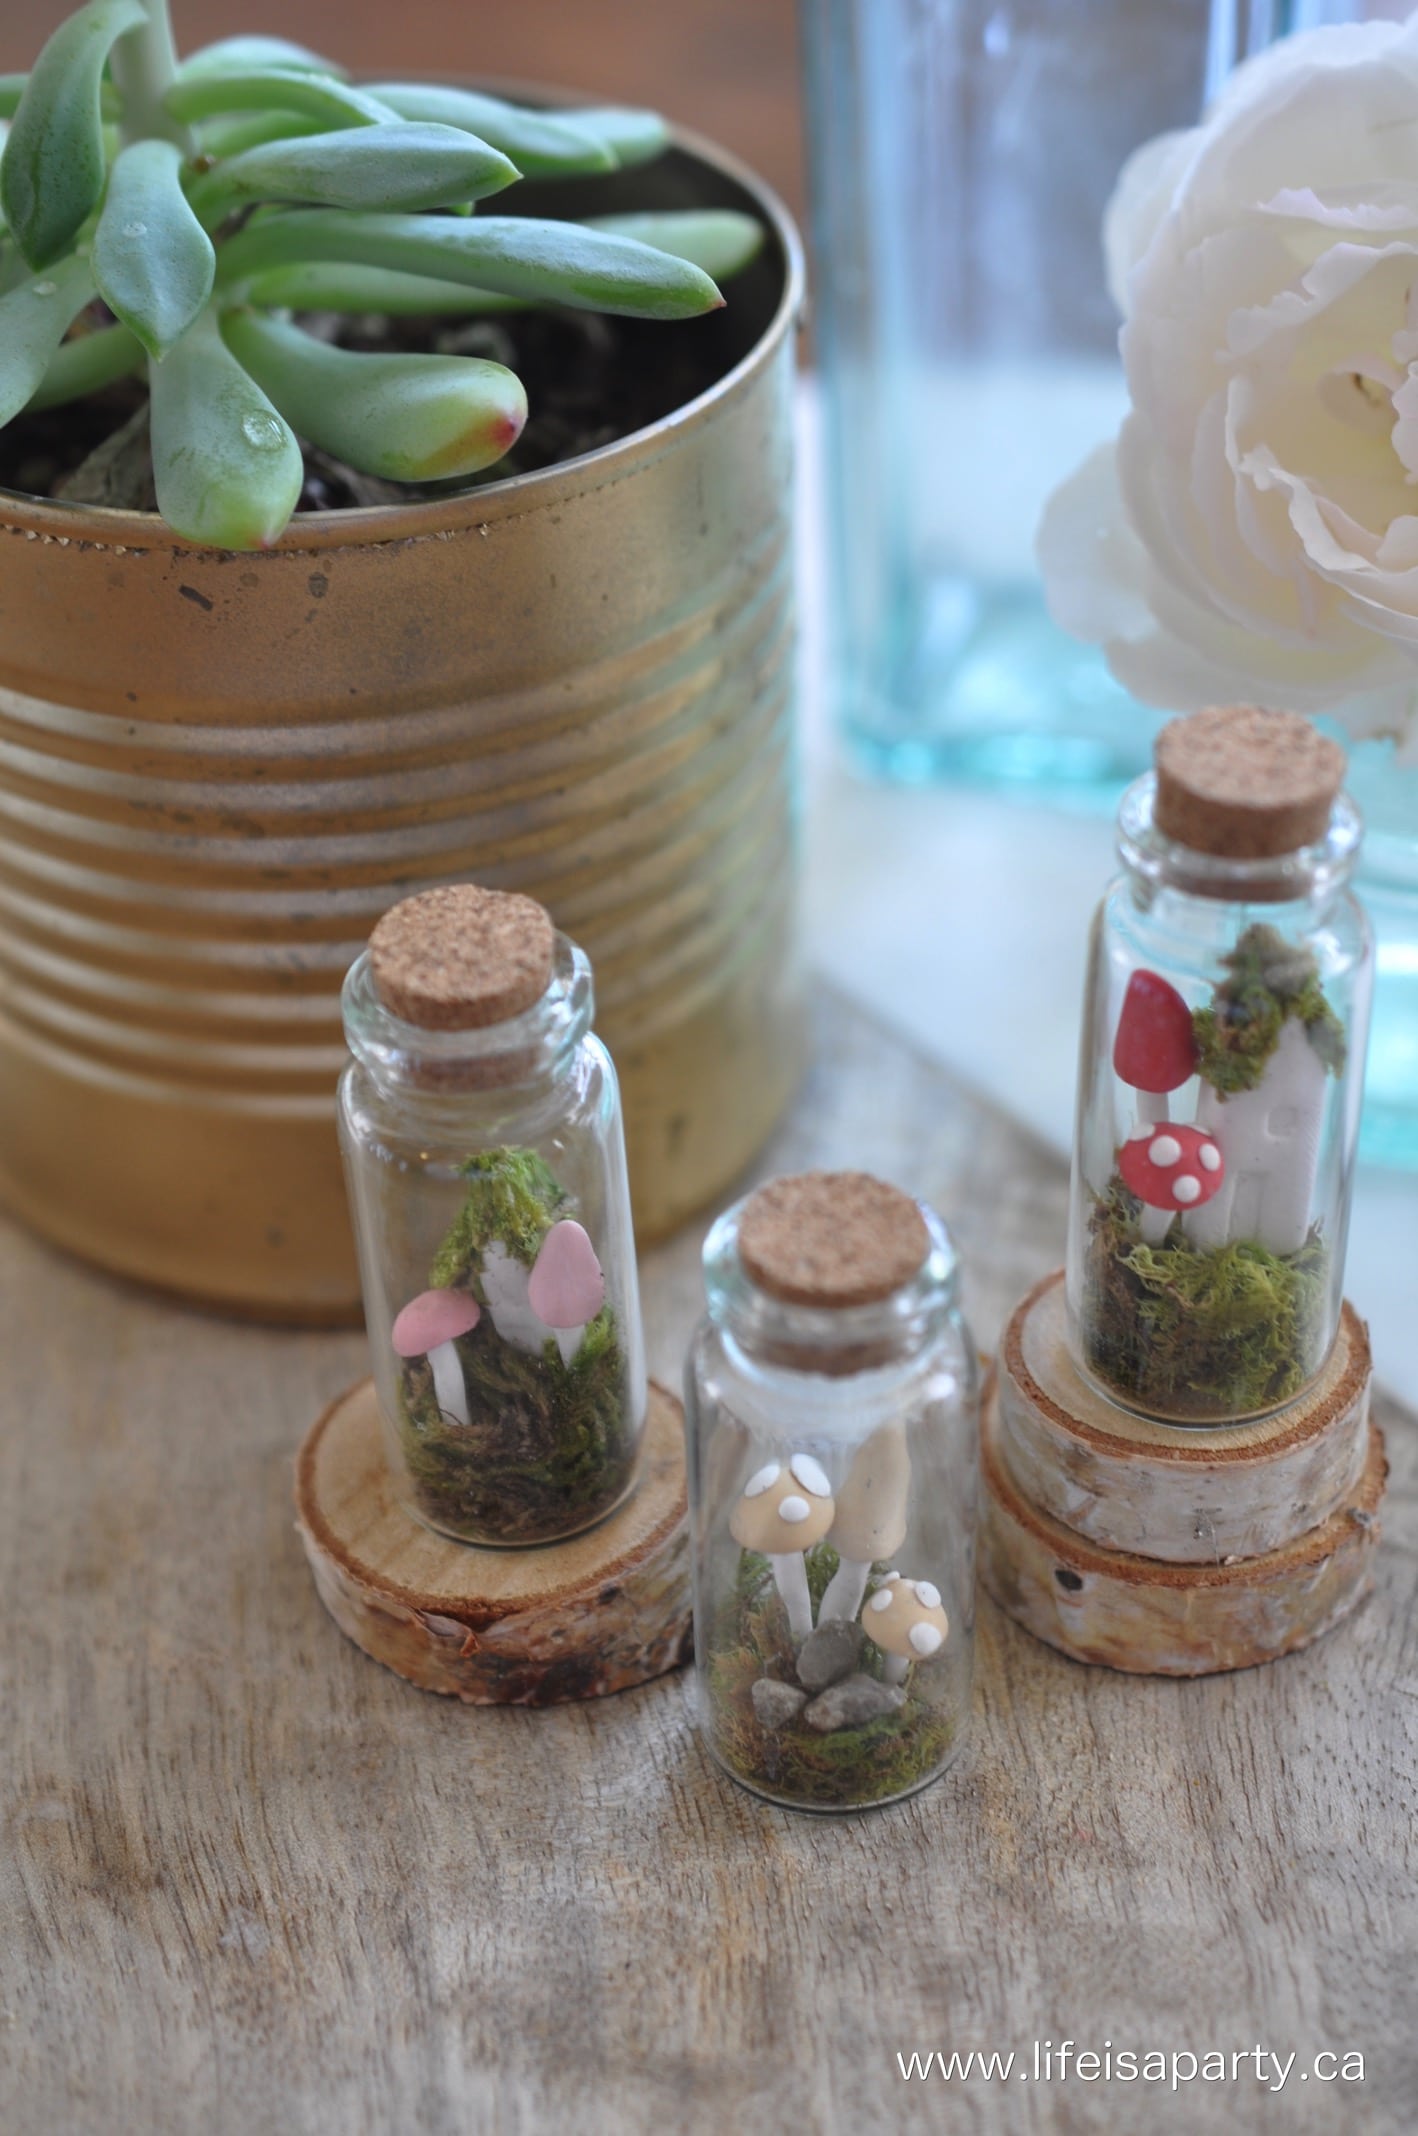 miniature polymer clay houses and mushrooms in a jar